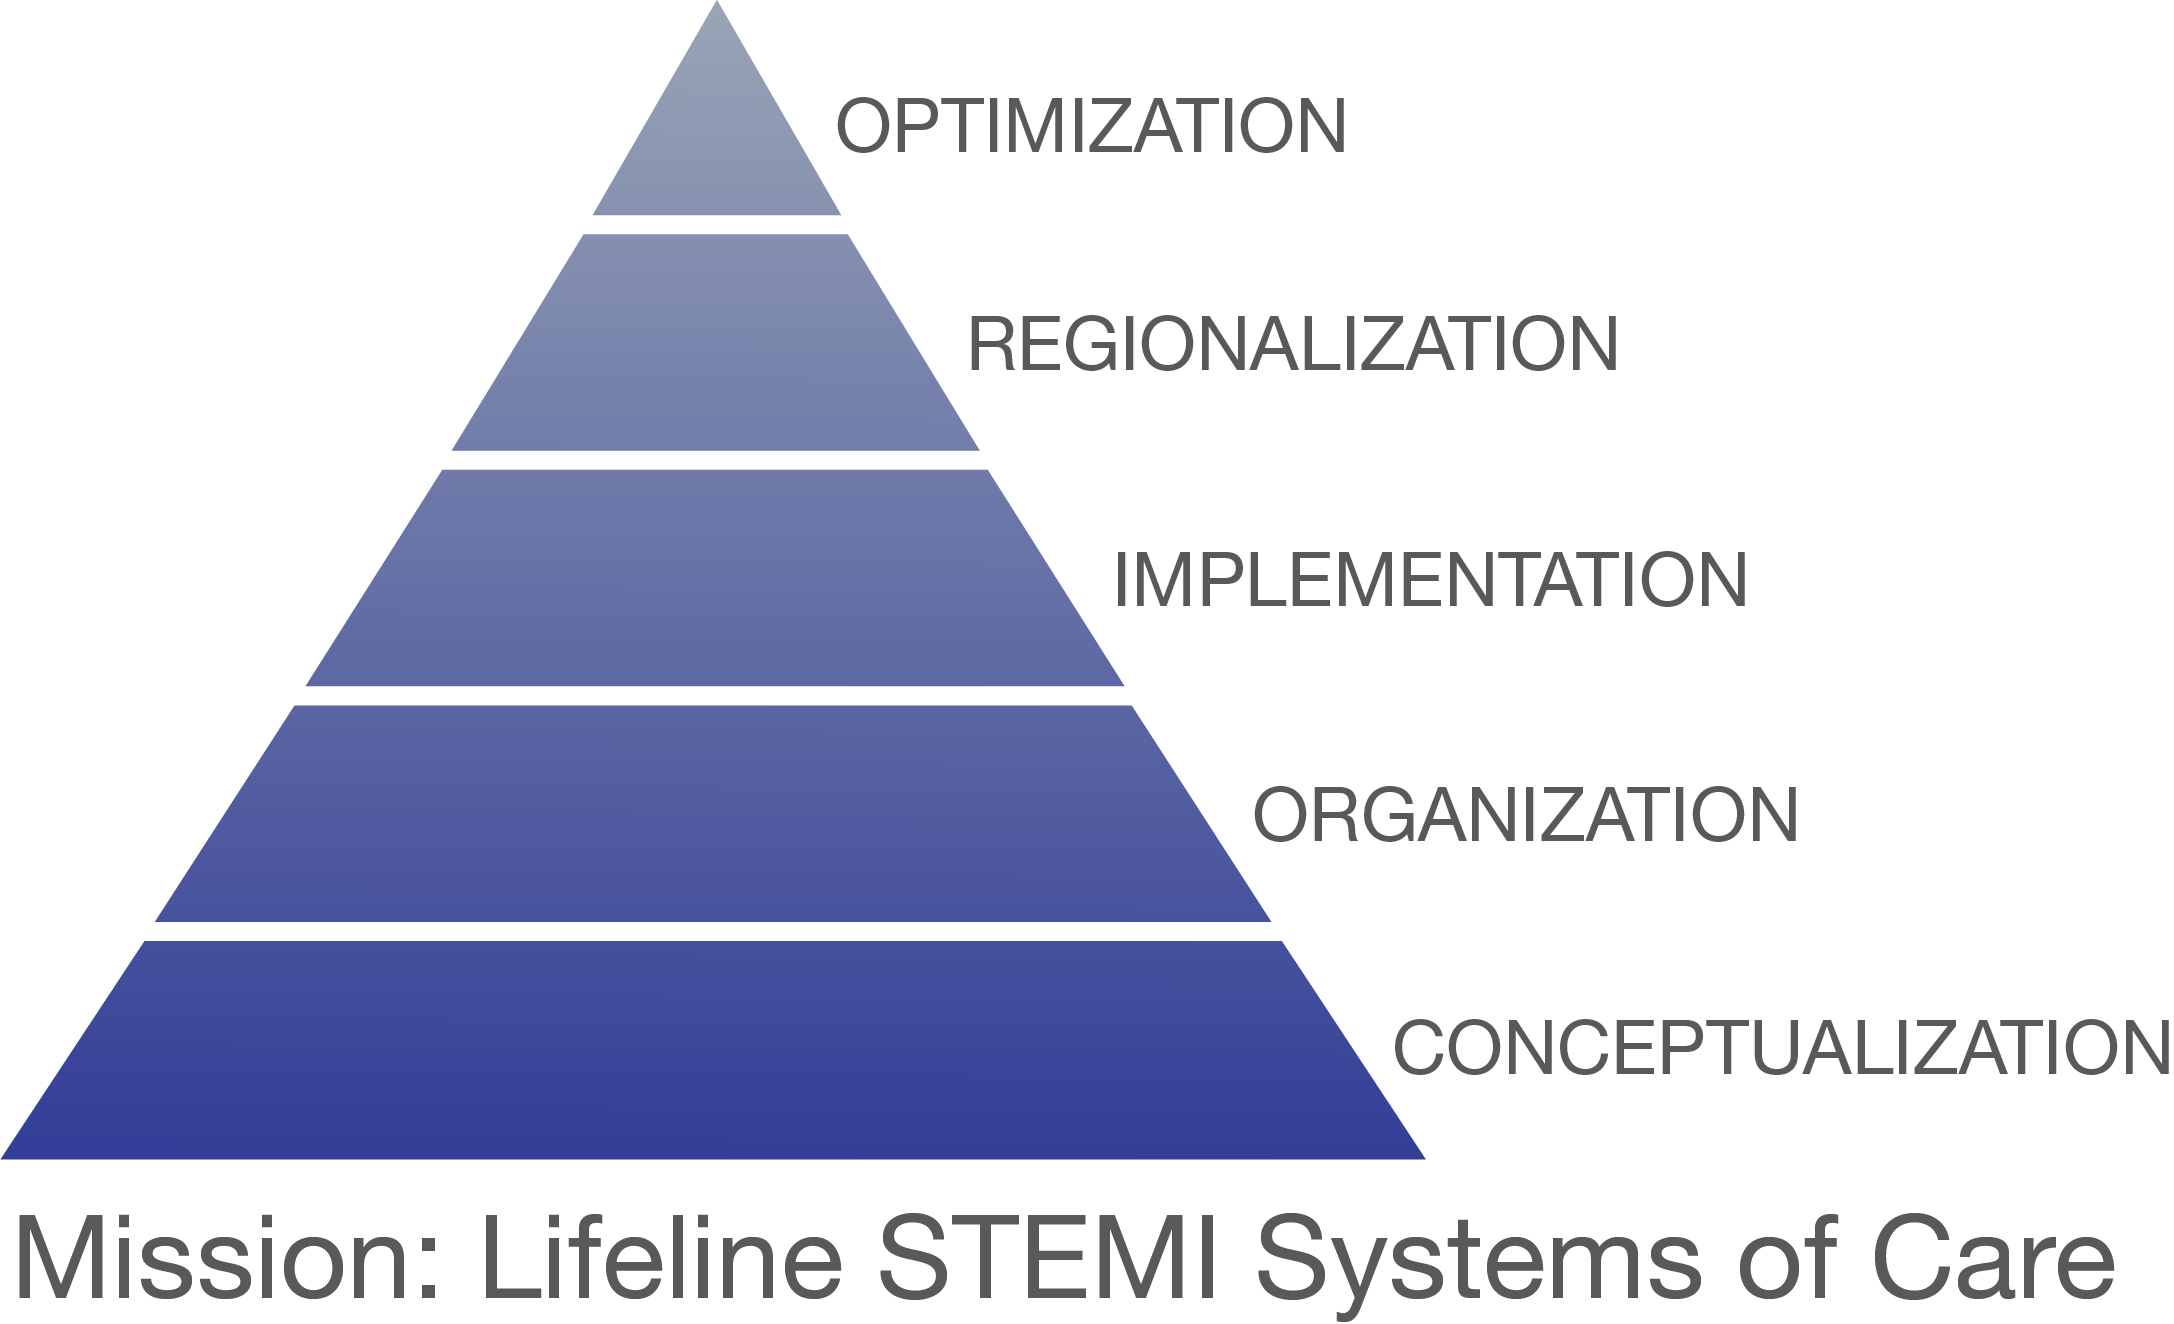 Mission Lifeline STEMI Systems of Care Pyramid